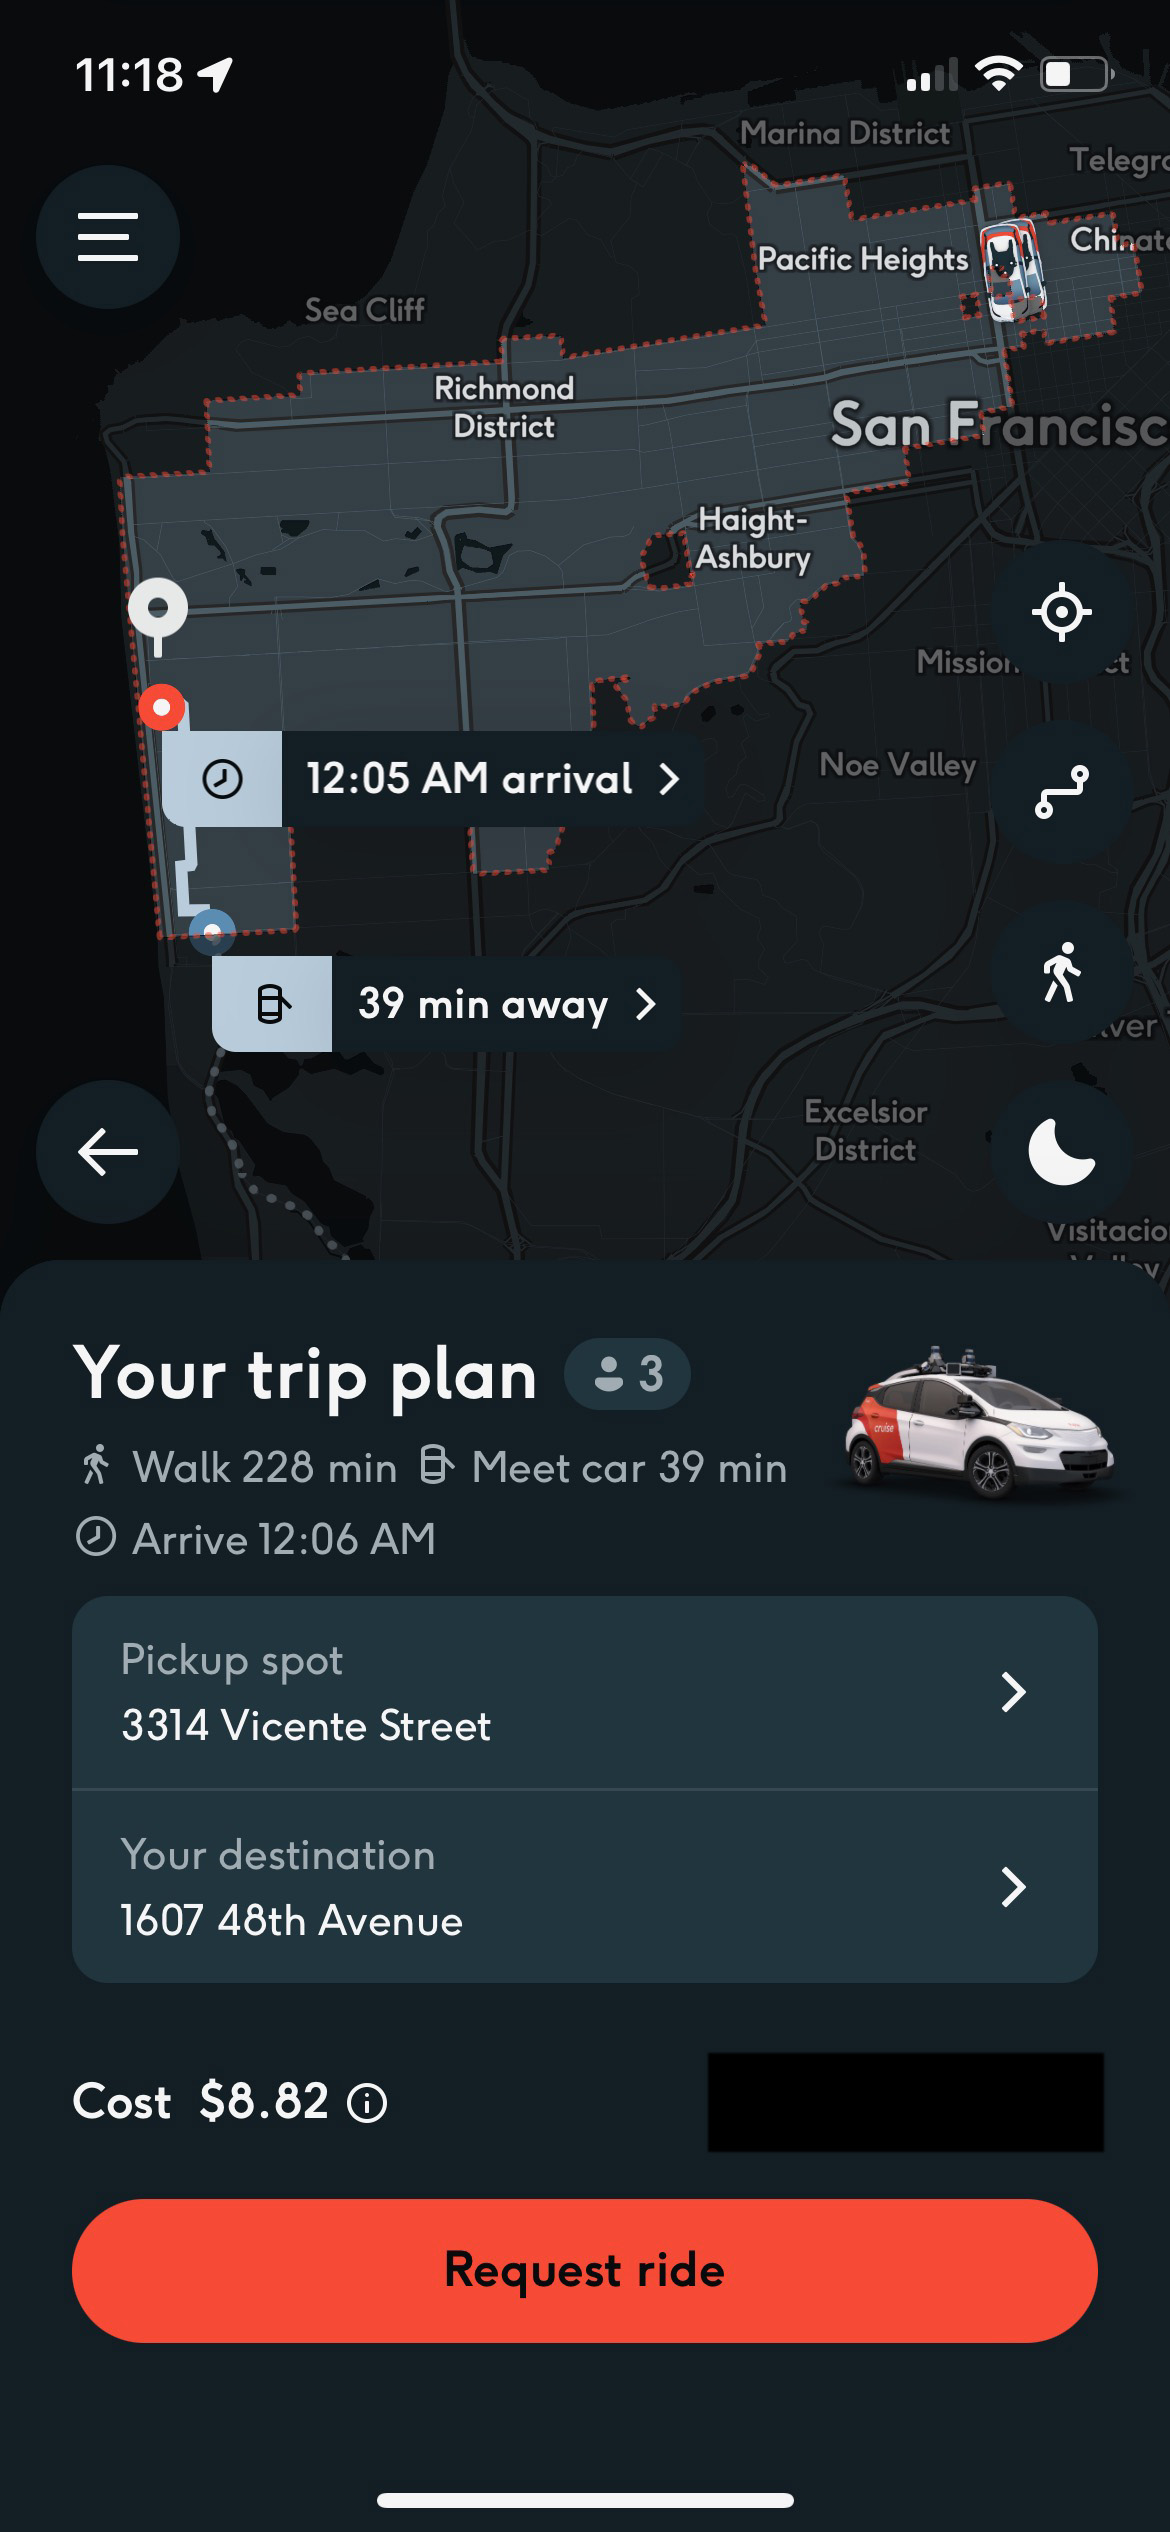 A screenshot of the trip plan. Car arriving in 39 minutes.